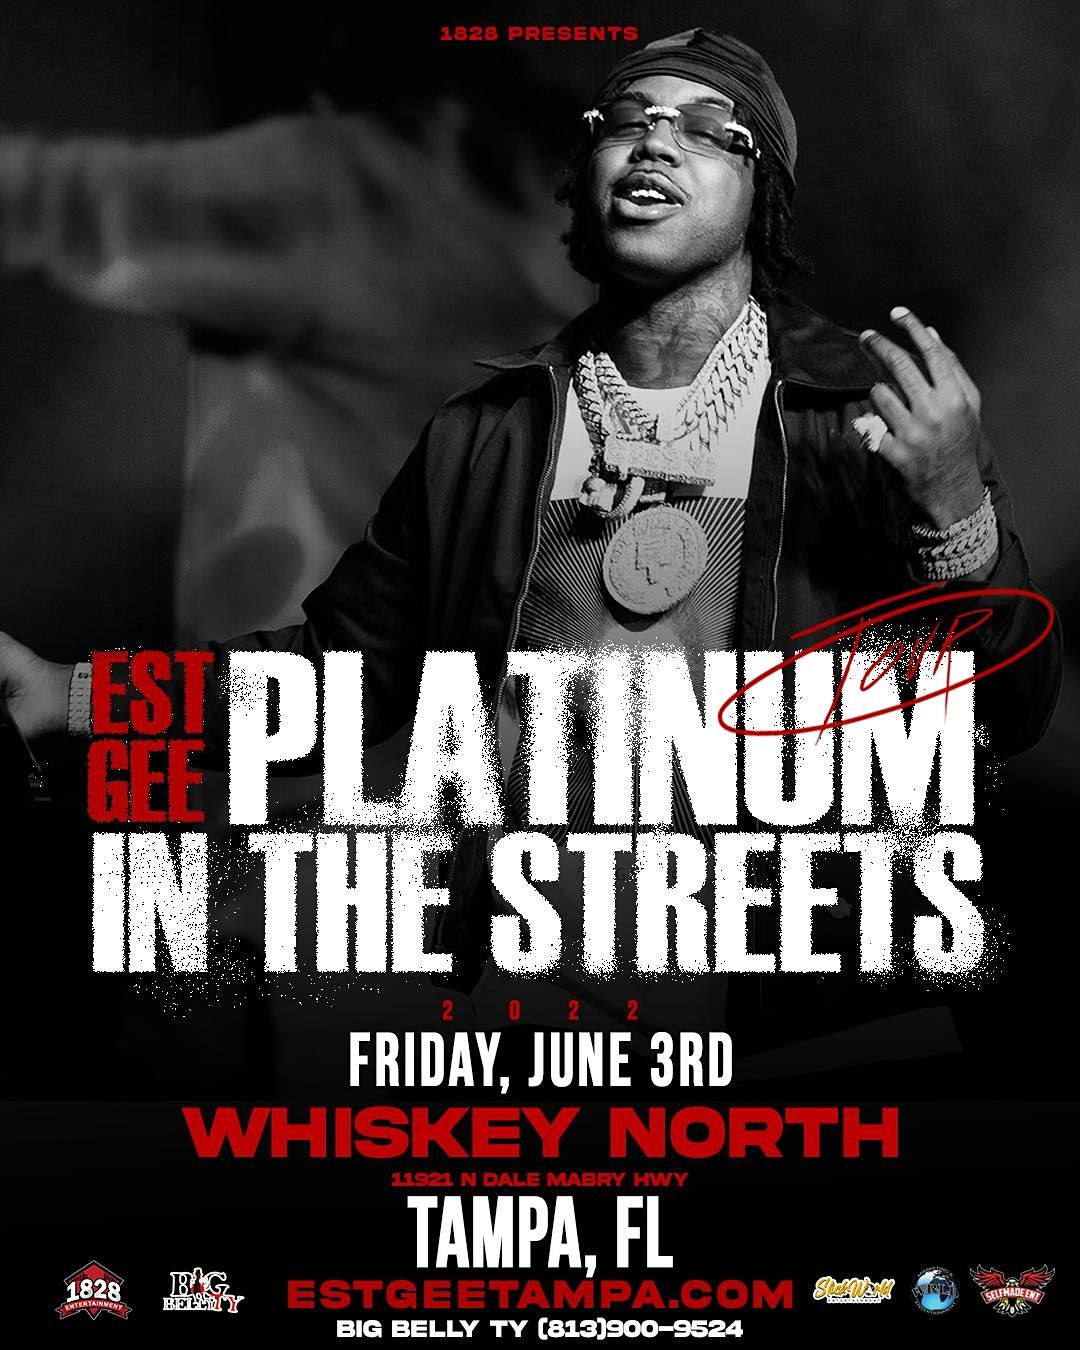 EST Gee Performing Live @ Whiskey North - Tampa, FL